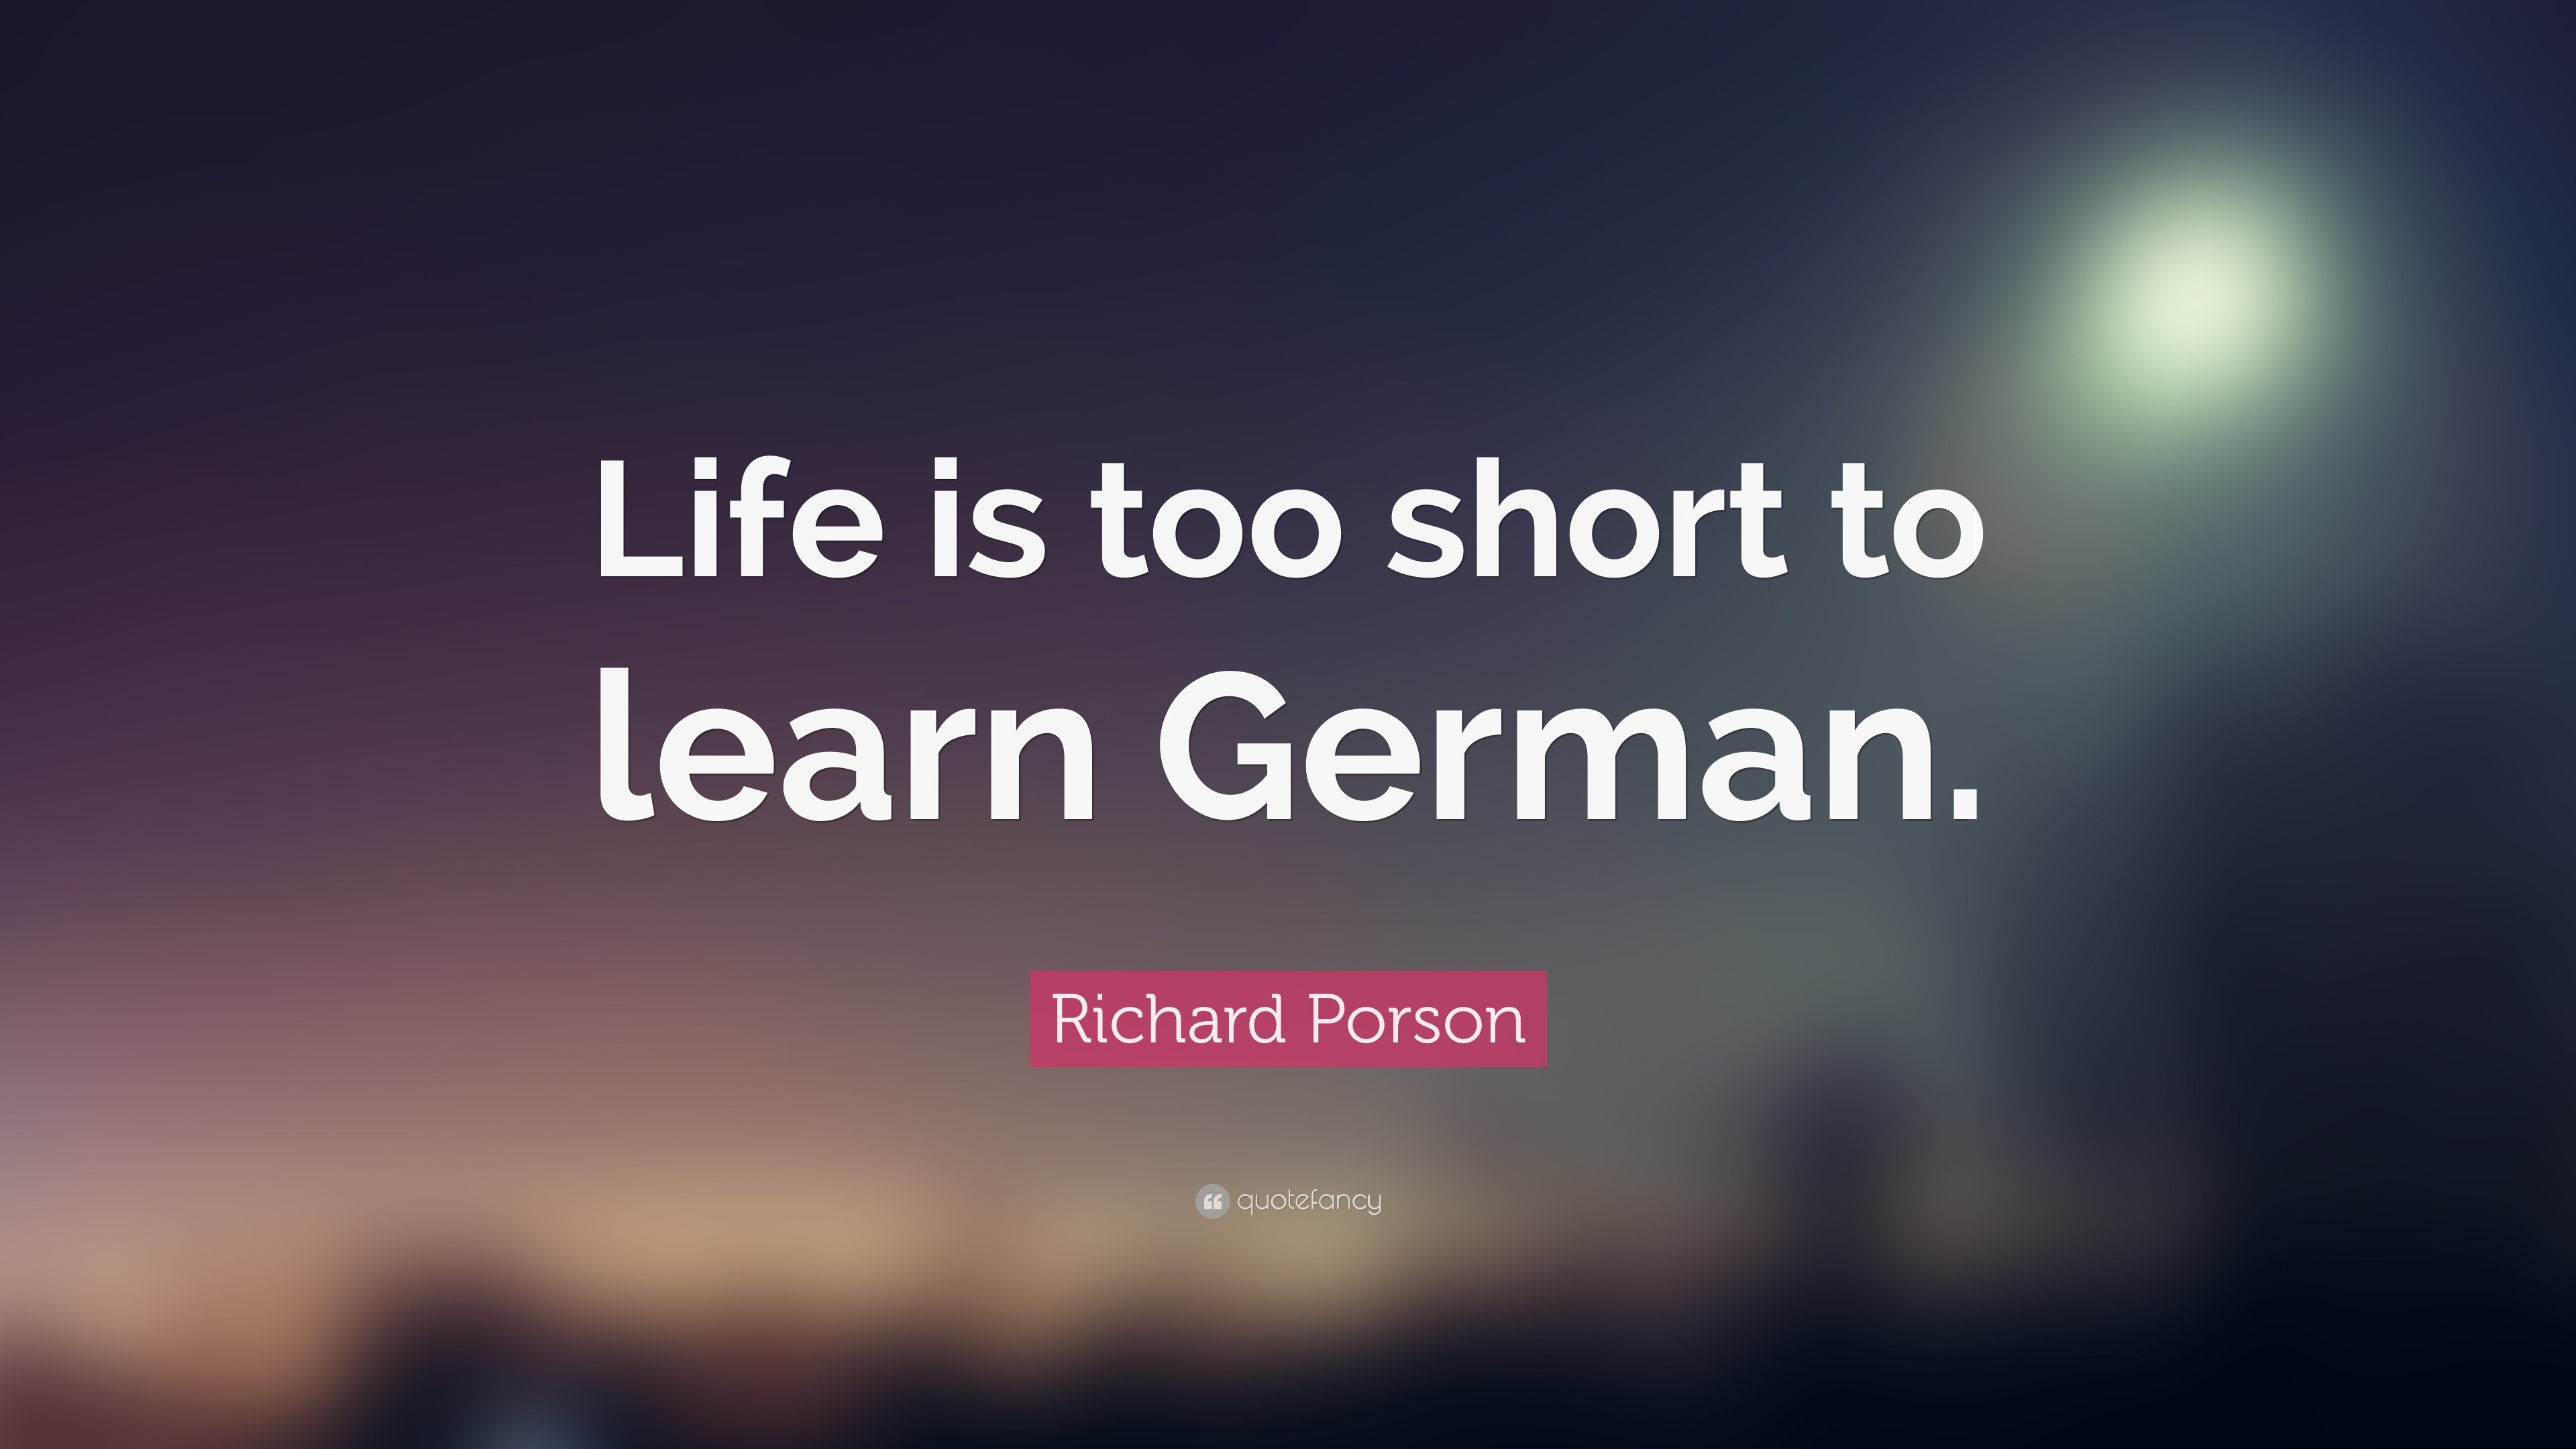 Richard Porson Quote: “Life is too short to learn German.” (22